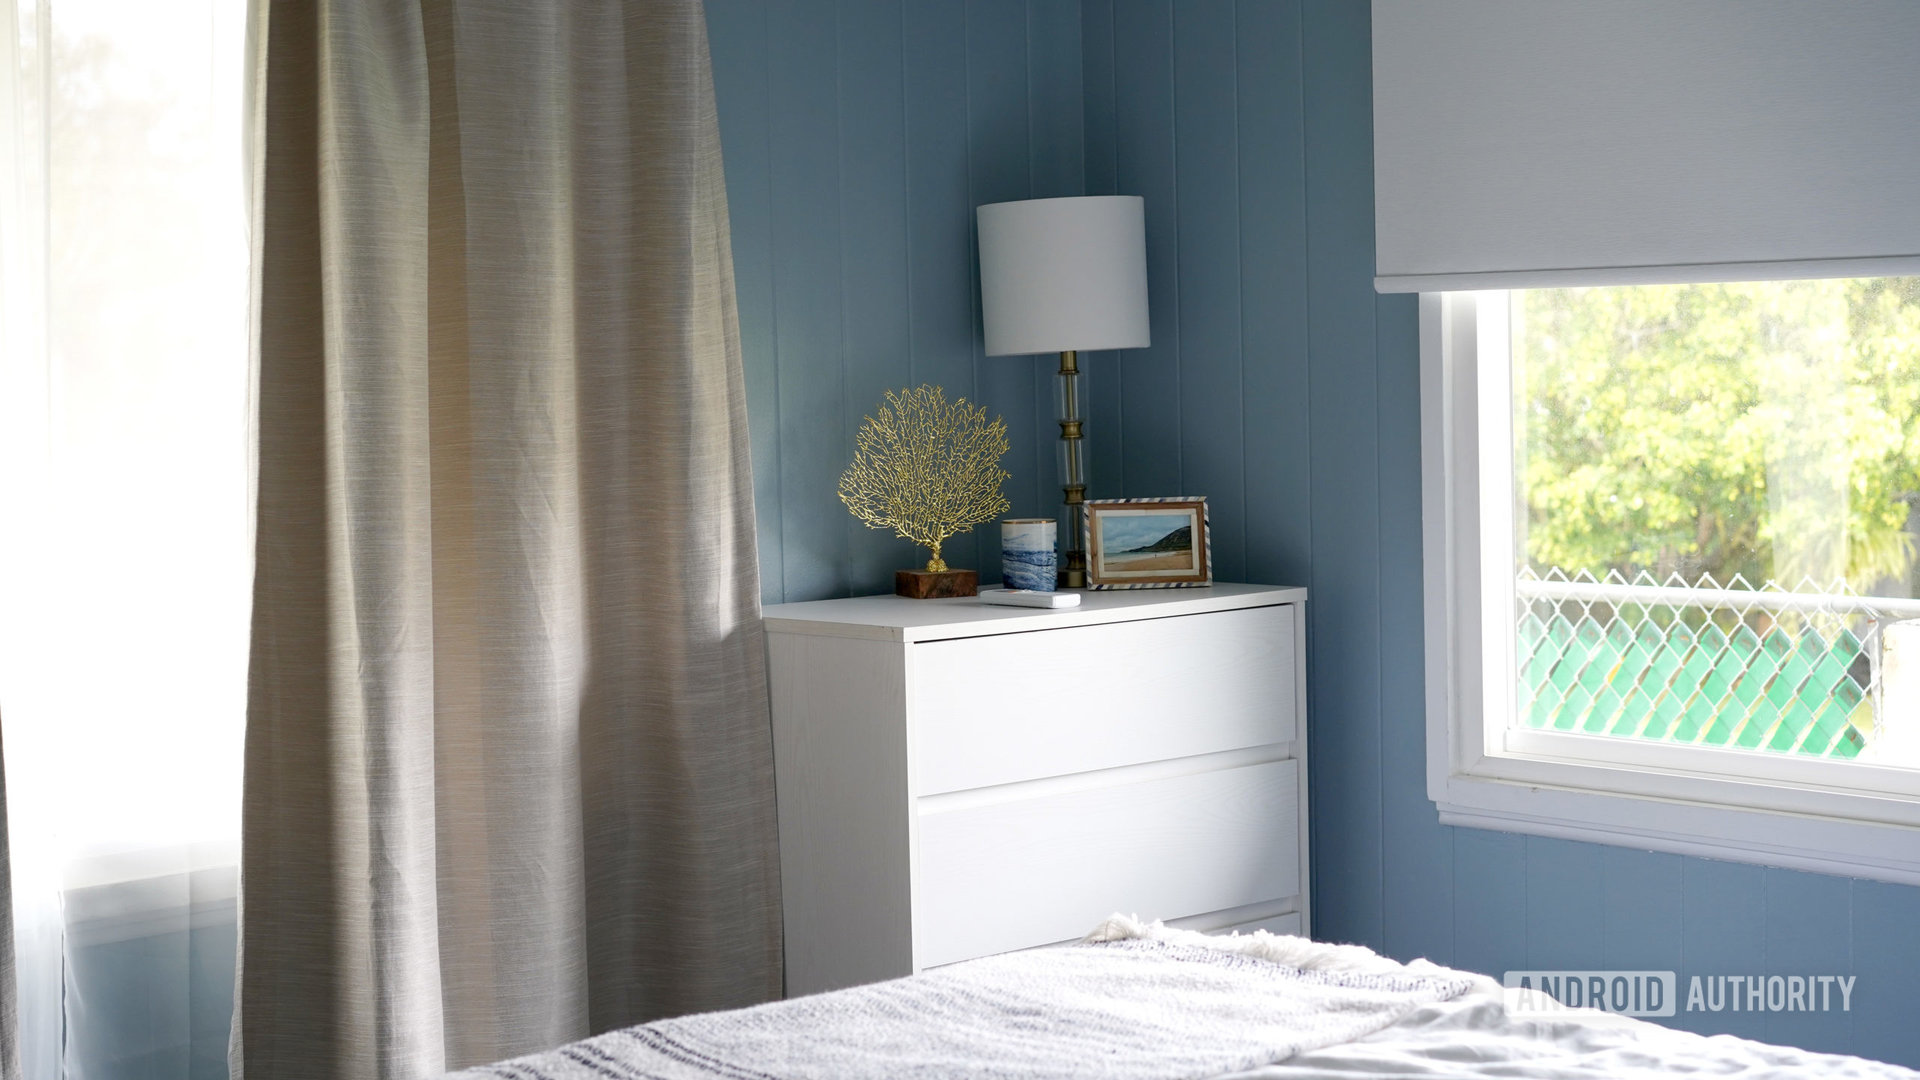 A small bedroom uses a smart blind on one wall and traditional curtains on another.